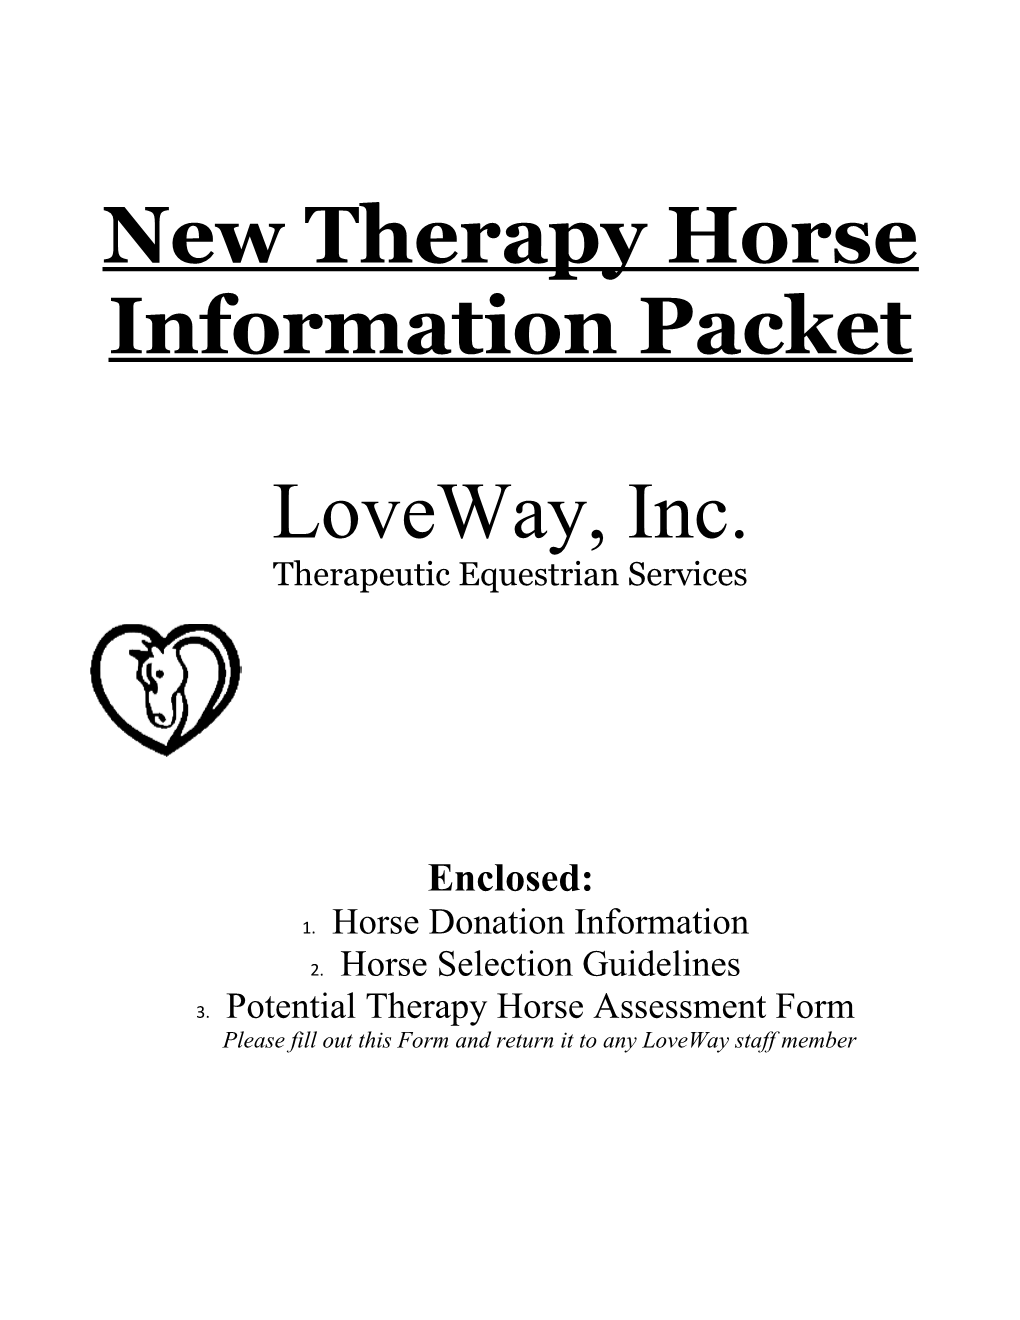 New Therapy Horse Information Packet